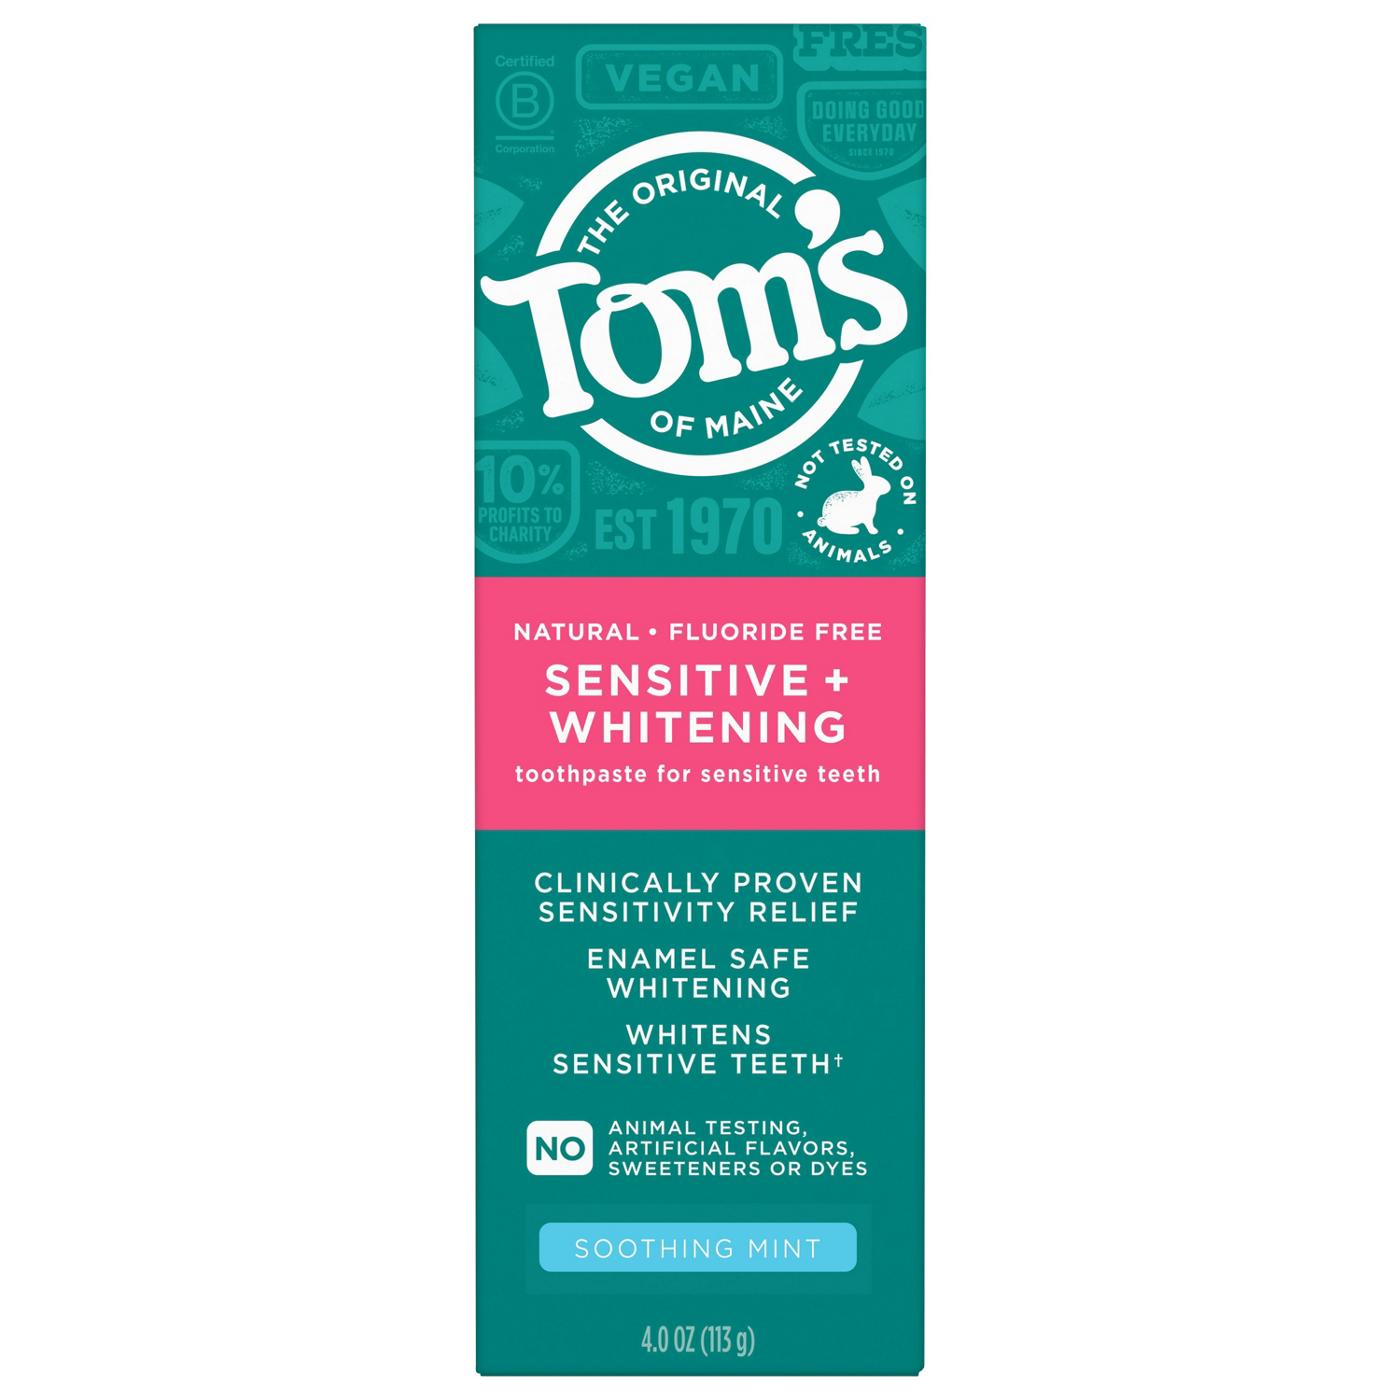 Tom's of Maine Sensitive + Whitening Toothpaste - Soothing Mint; image 3 of 9